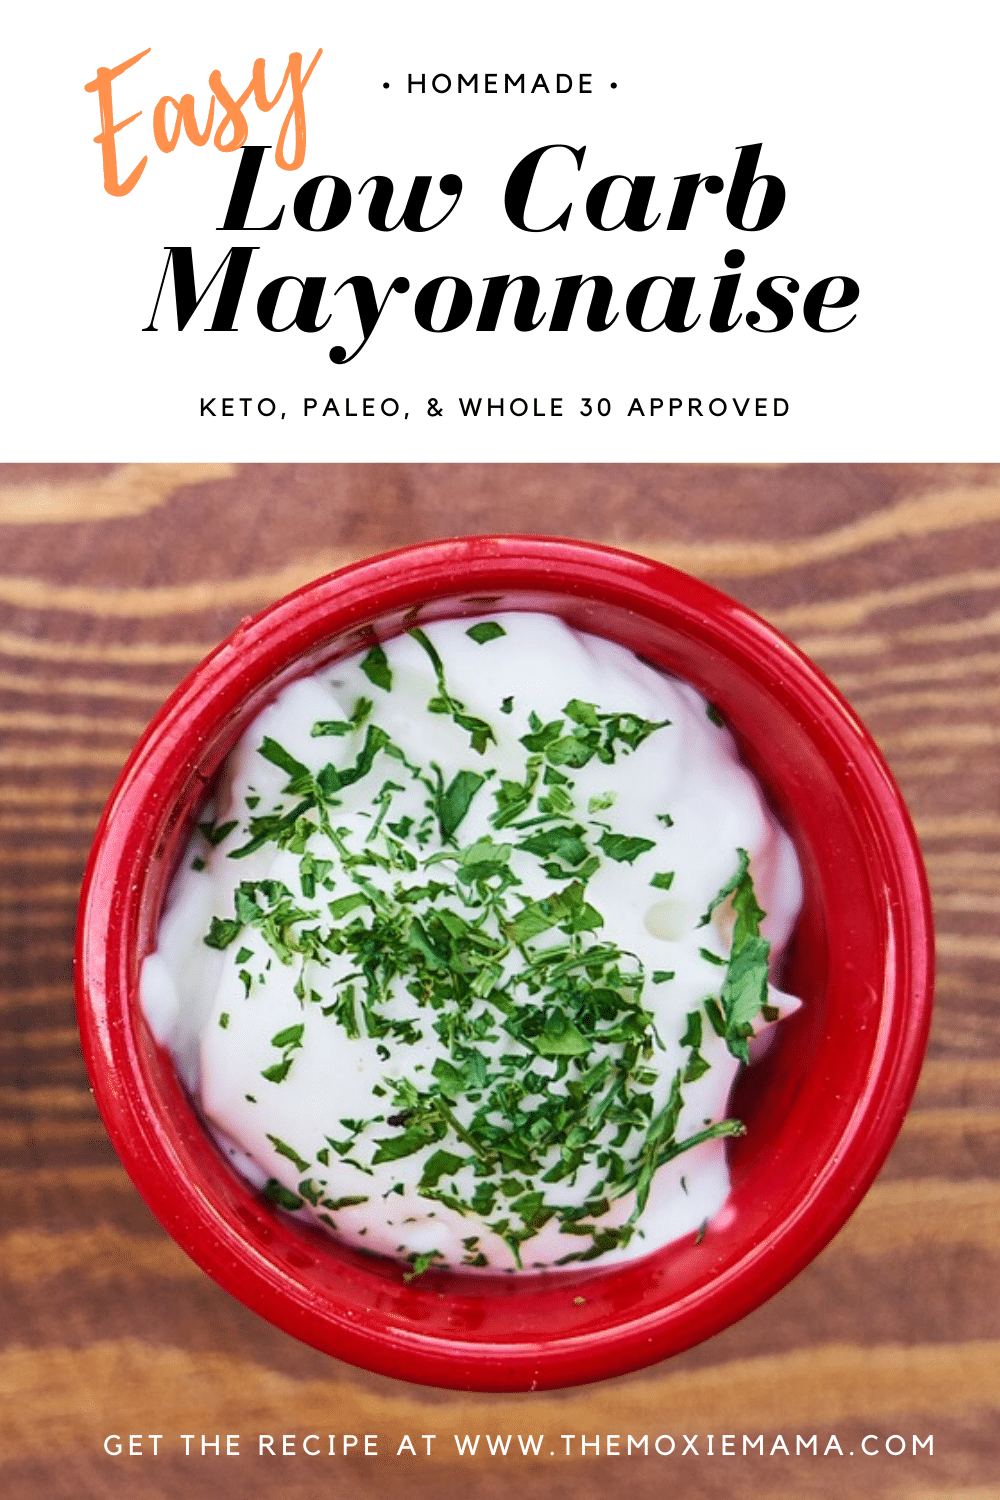 Easy Low Carb Mayonnaise Recipe. Pales, Whole30, and Keto approved. 